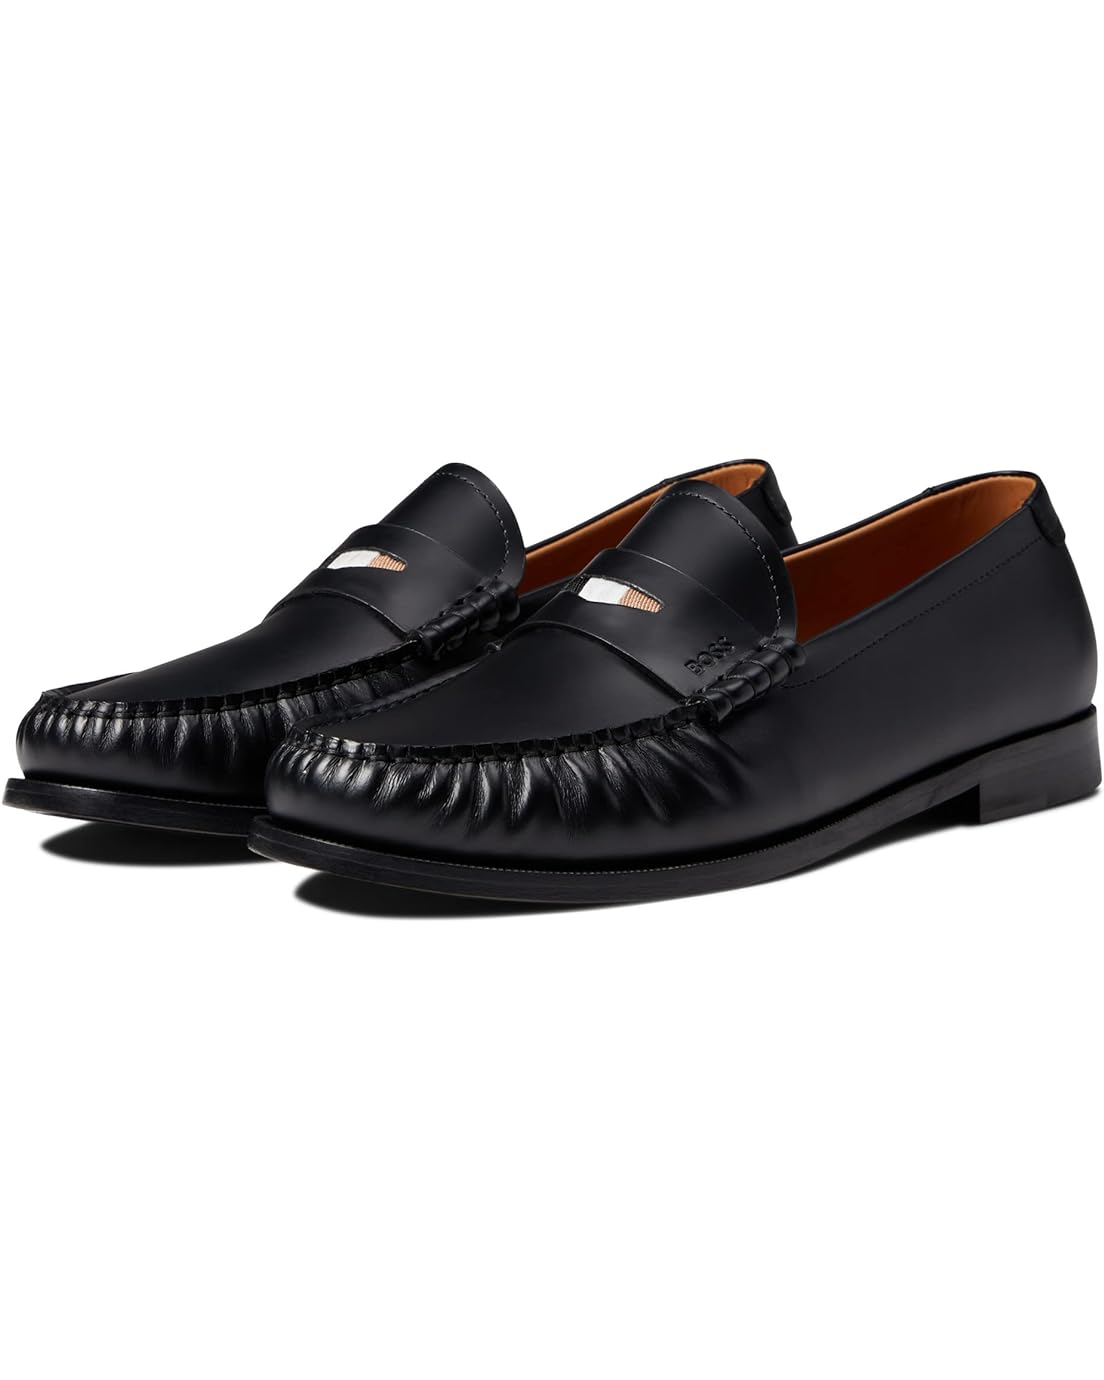 BOSS Nethan Penny Loafer